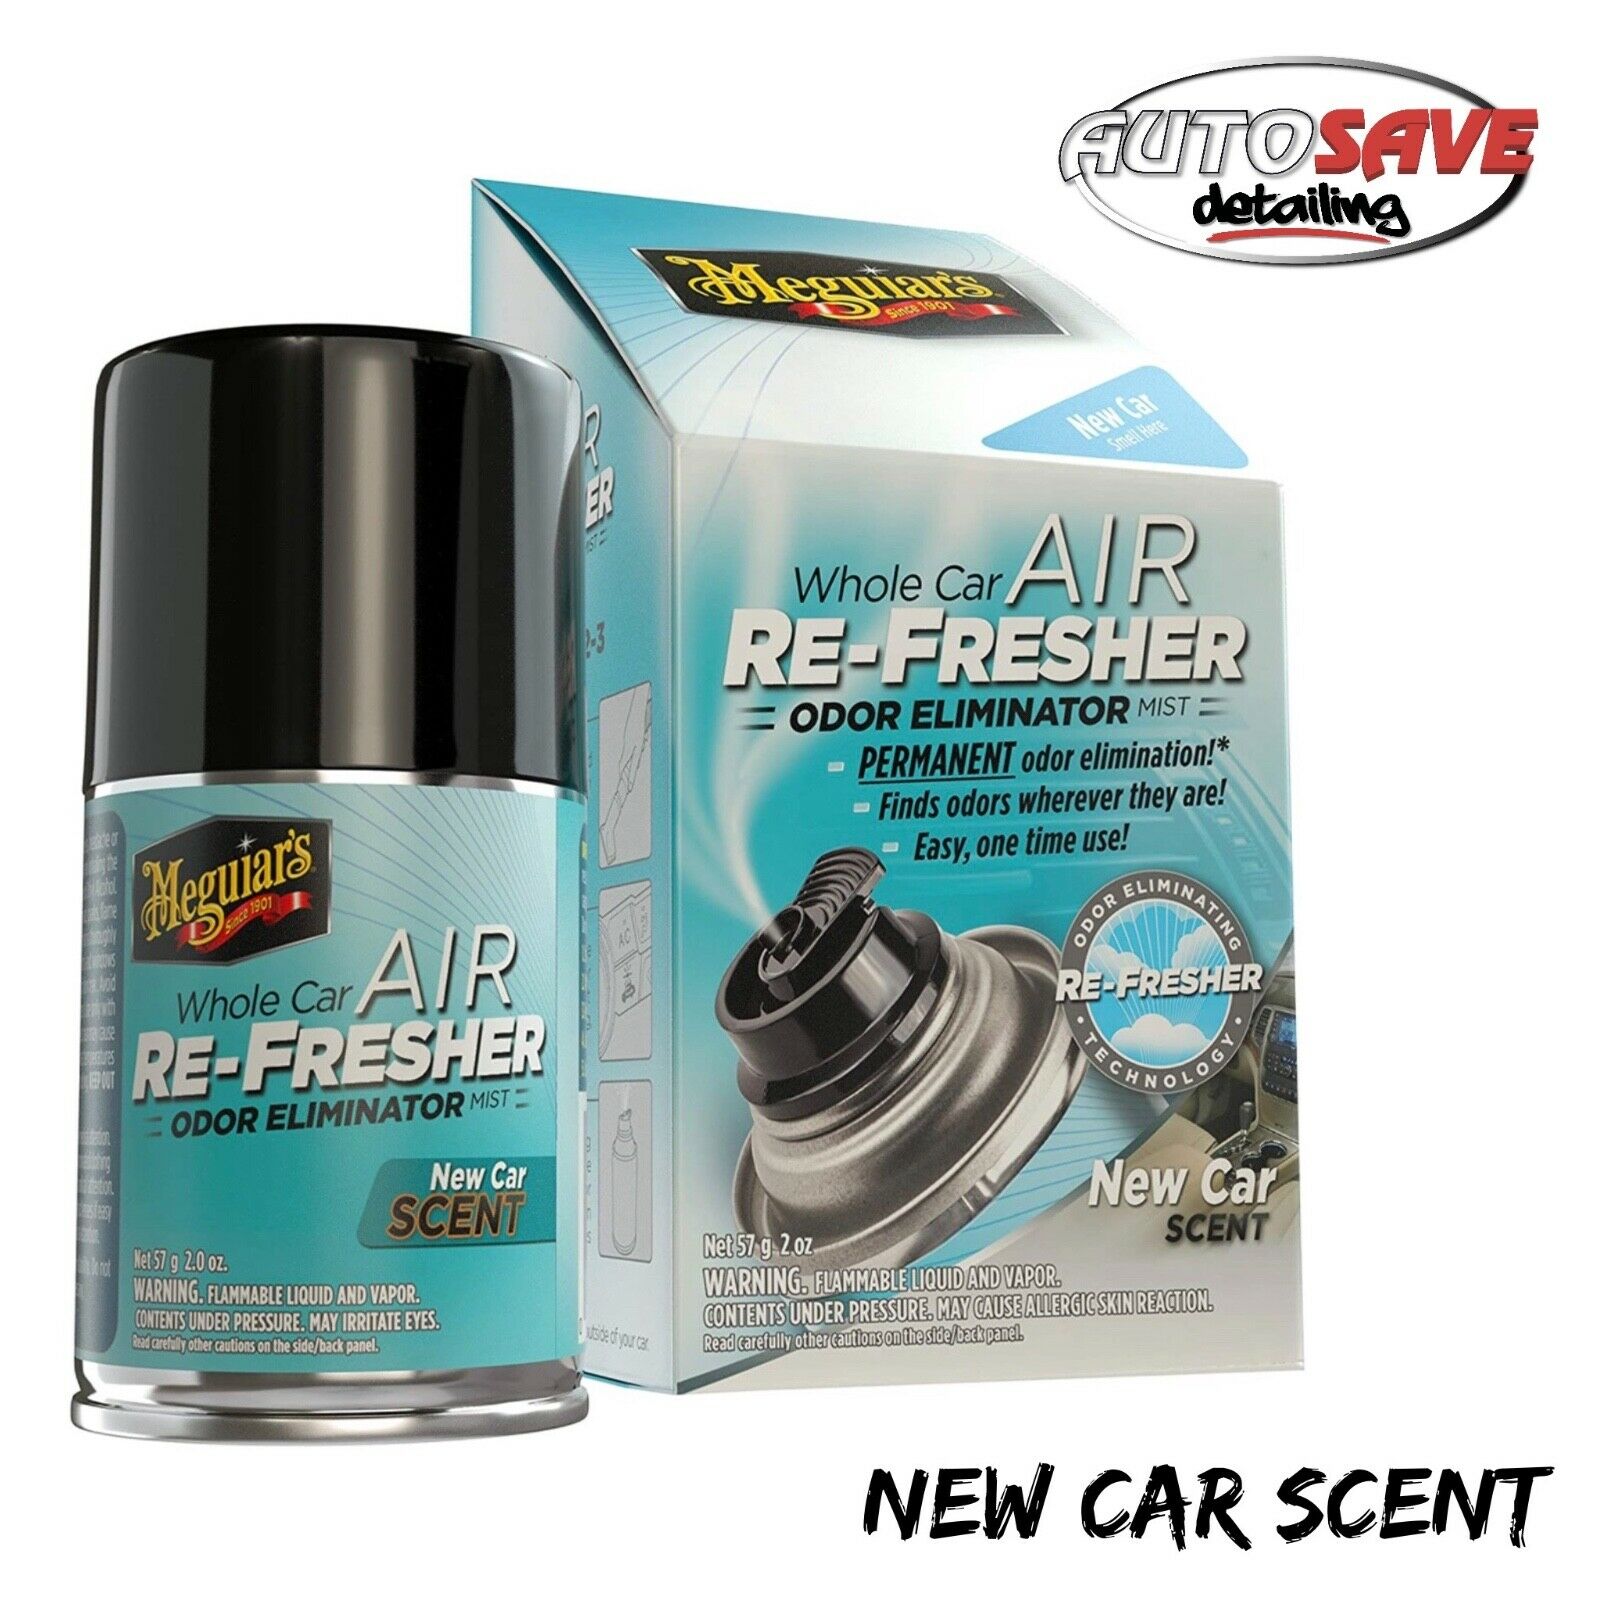 Meguiar's Air Re-Fresher New Car Scent – Autosave Components